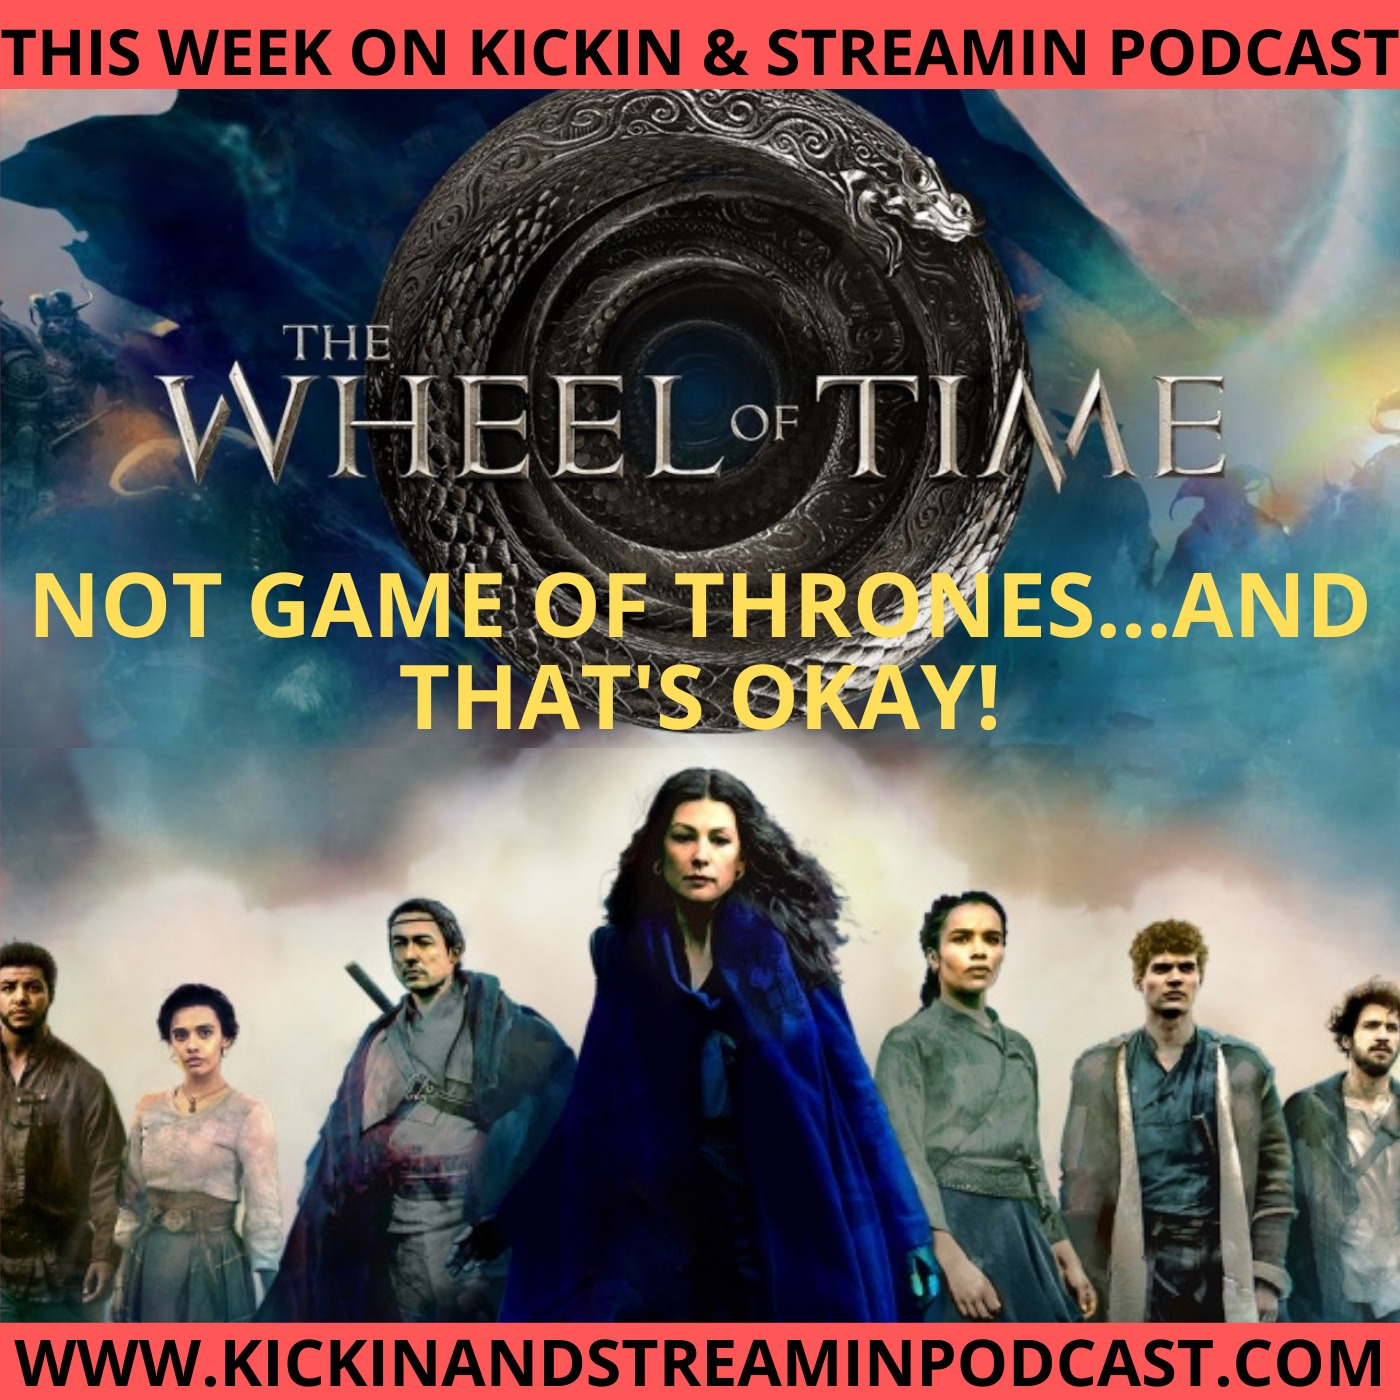 The Wheel of Time: Not Game of Thrones...and That's Okay! Image